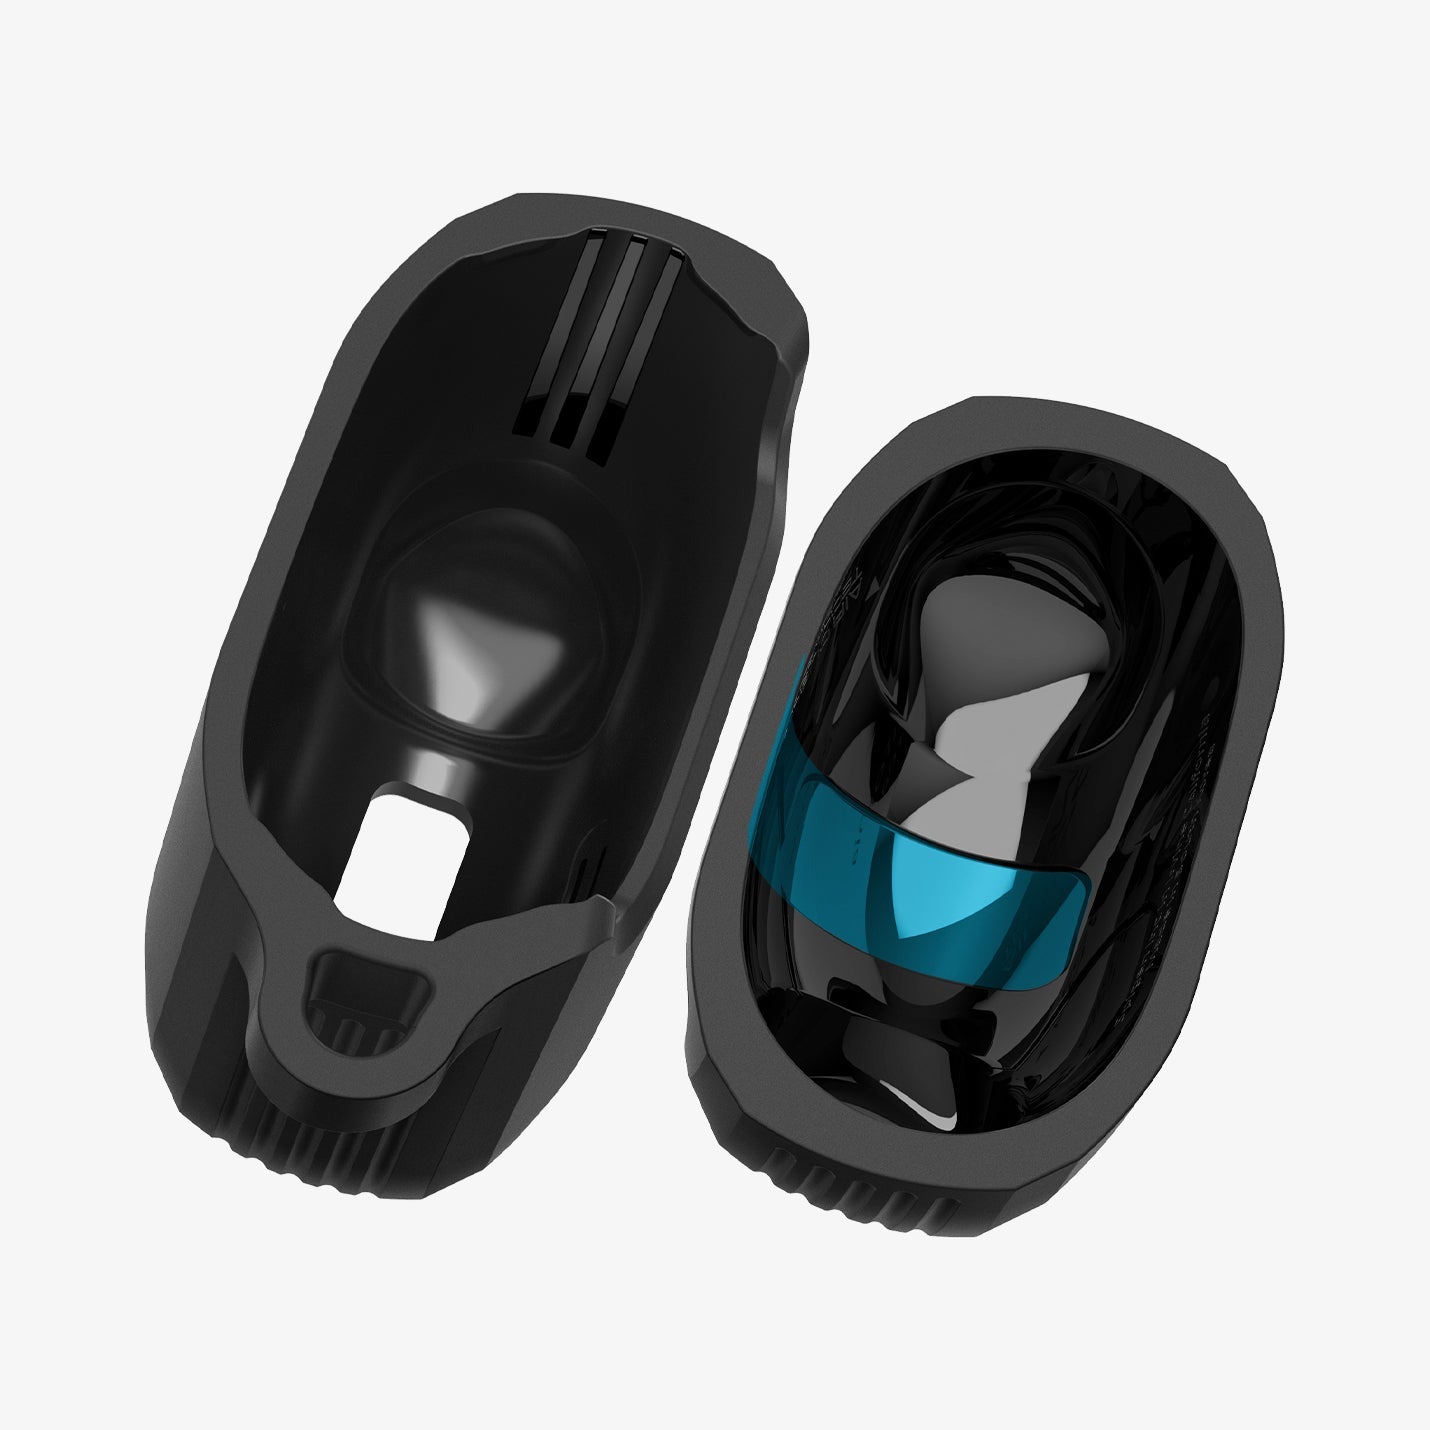 ACS05133 - Pixel Buds Pro Case Rugged Armor in matte black showing the inside of case